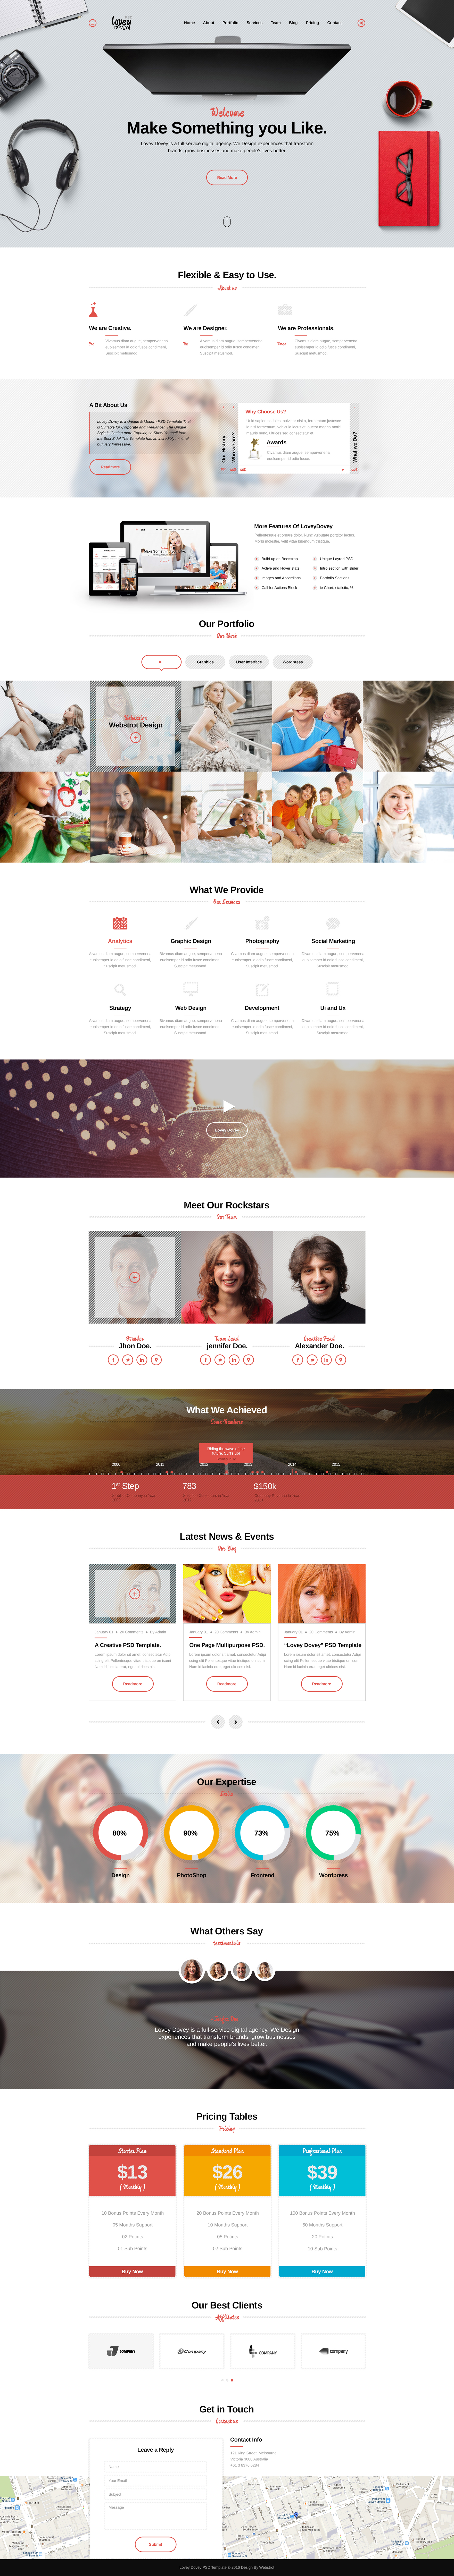 Lovey Dovey One Page PSD Template